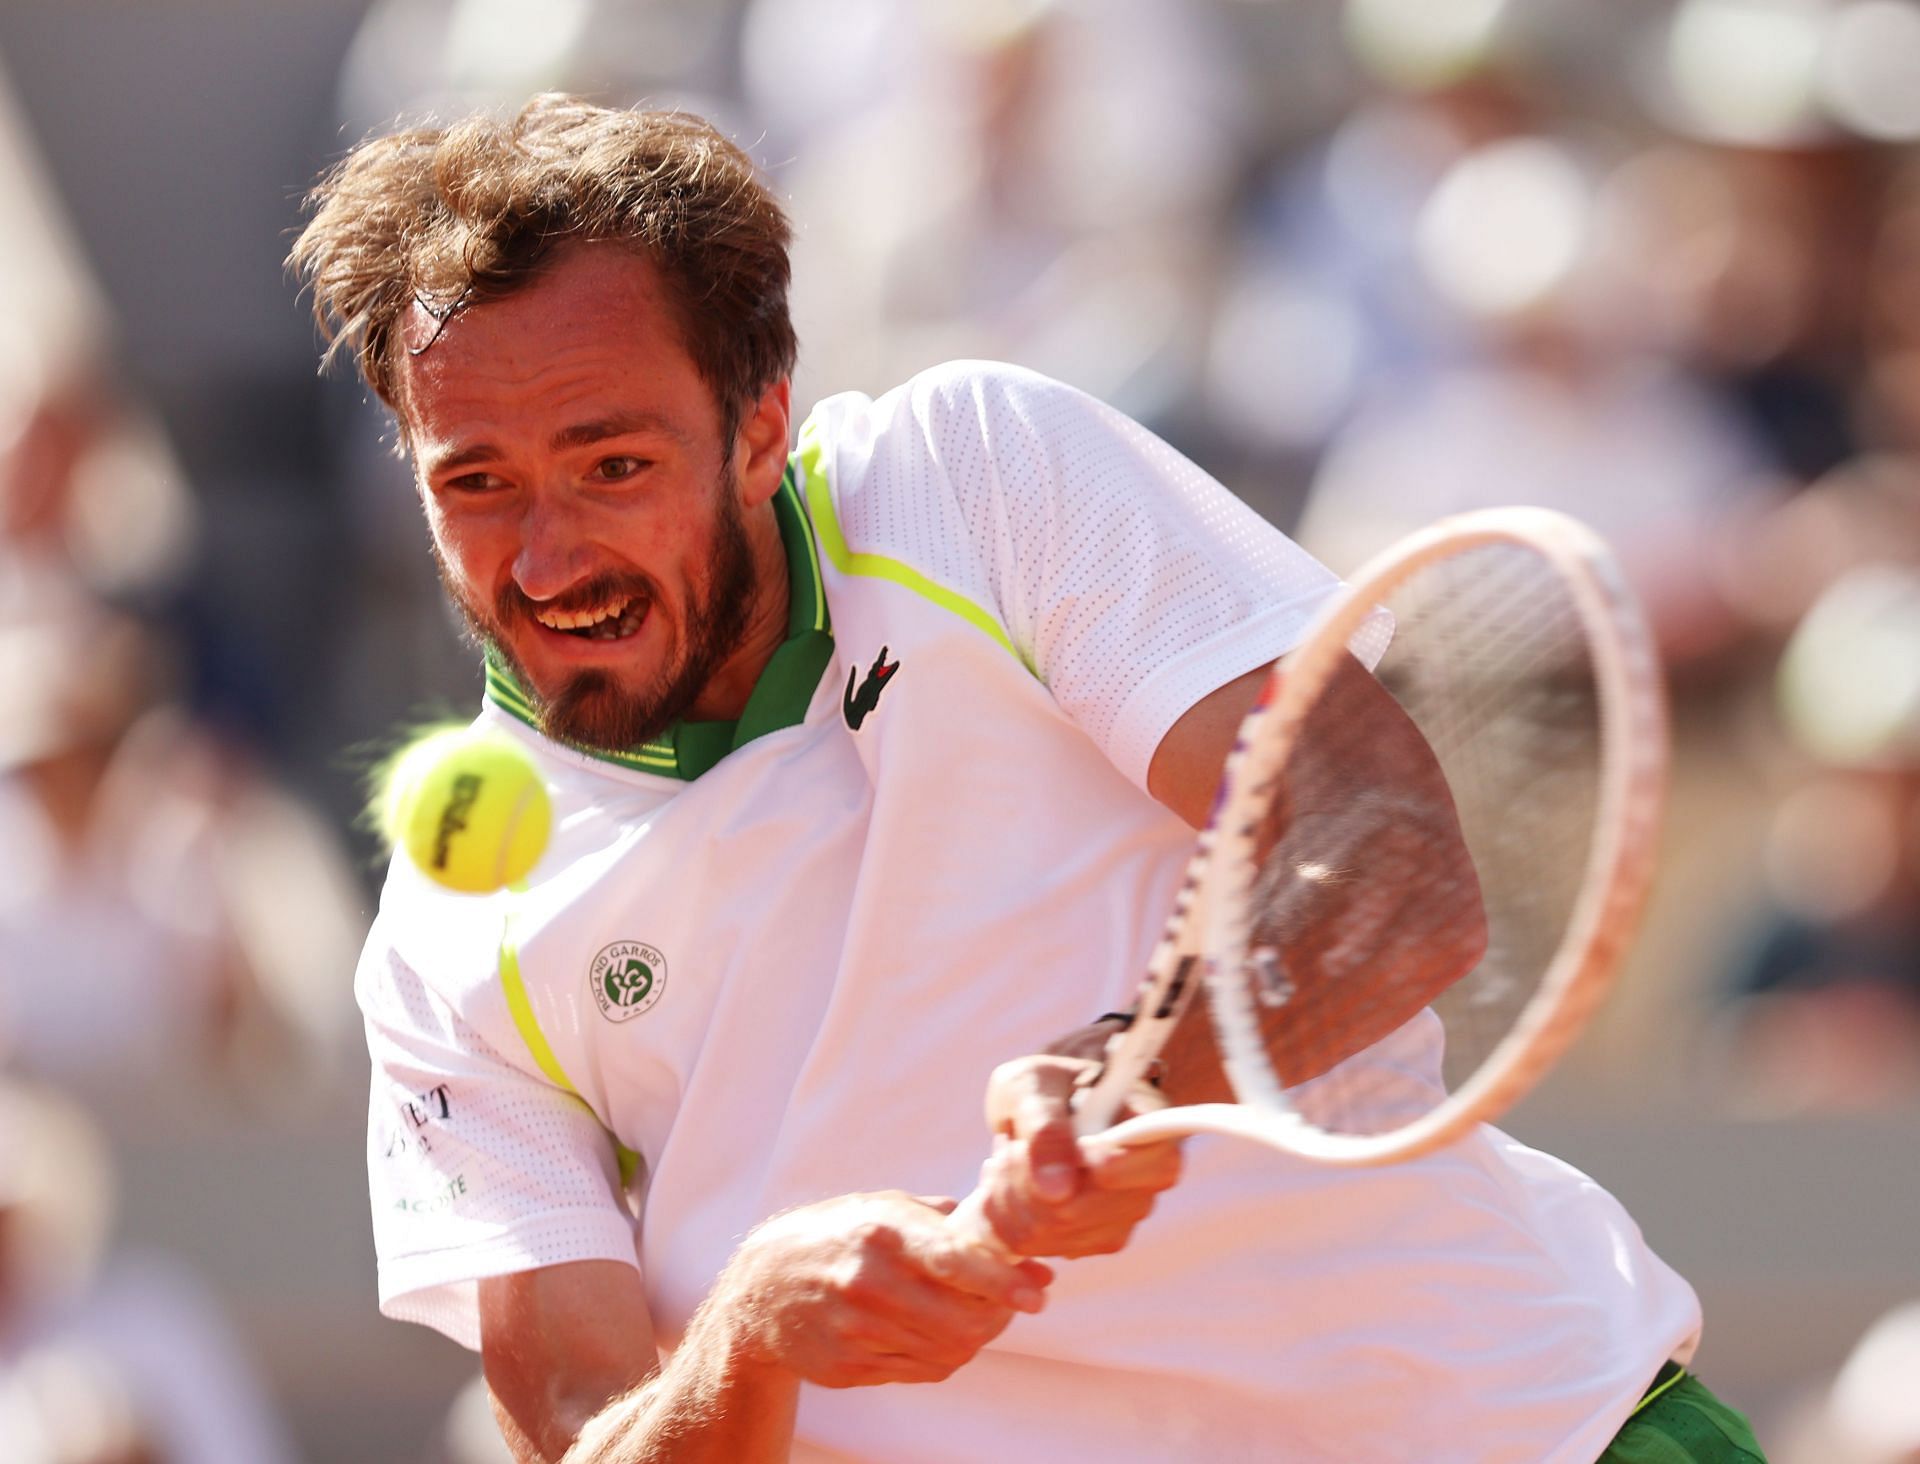 Daniil Medvedev in action at the French Open